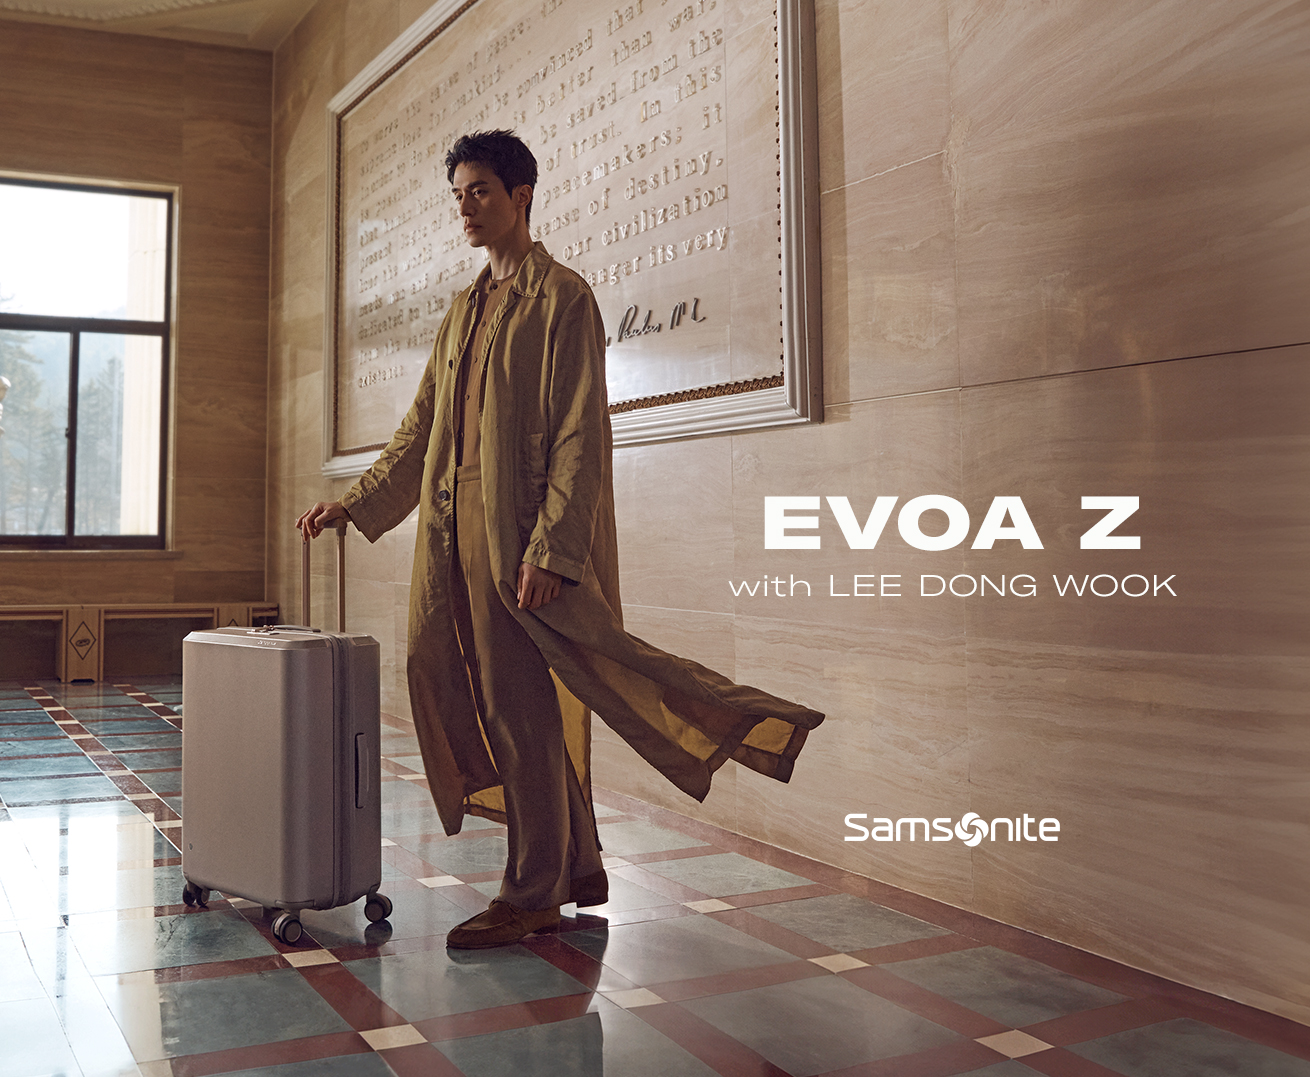 EVOA Z with LEE DONG WOOK Samsonite